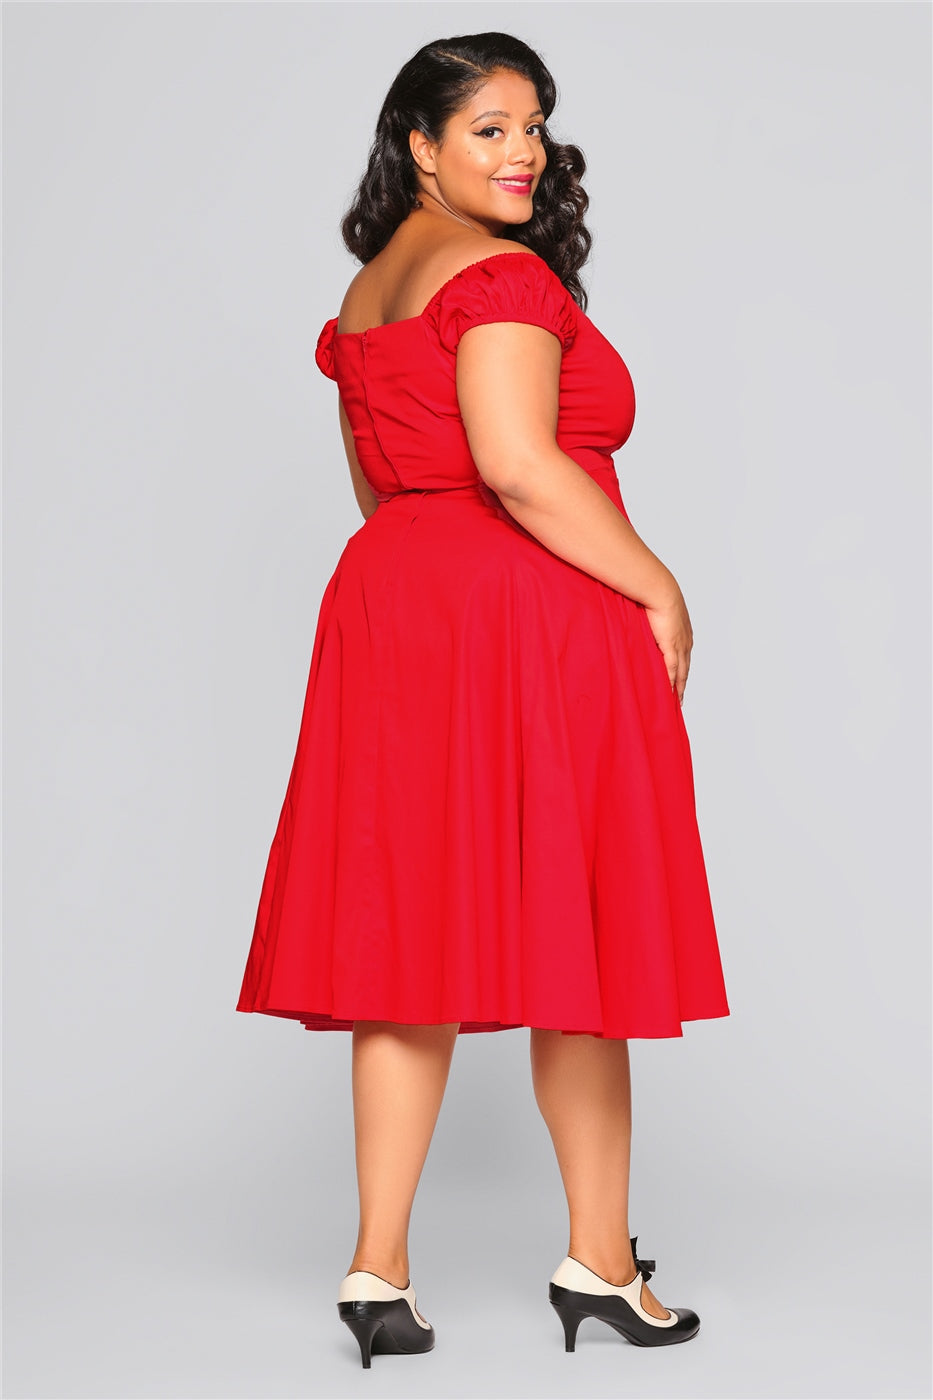 Dolores Classic Kleid in rot